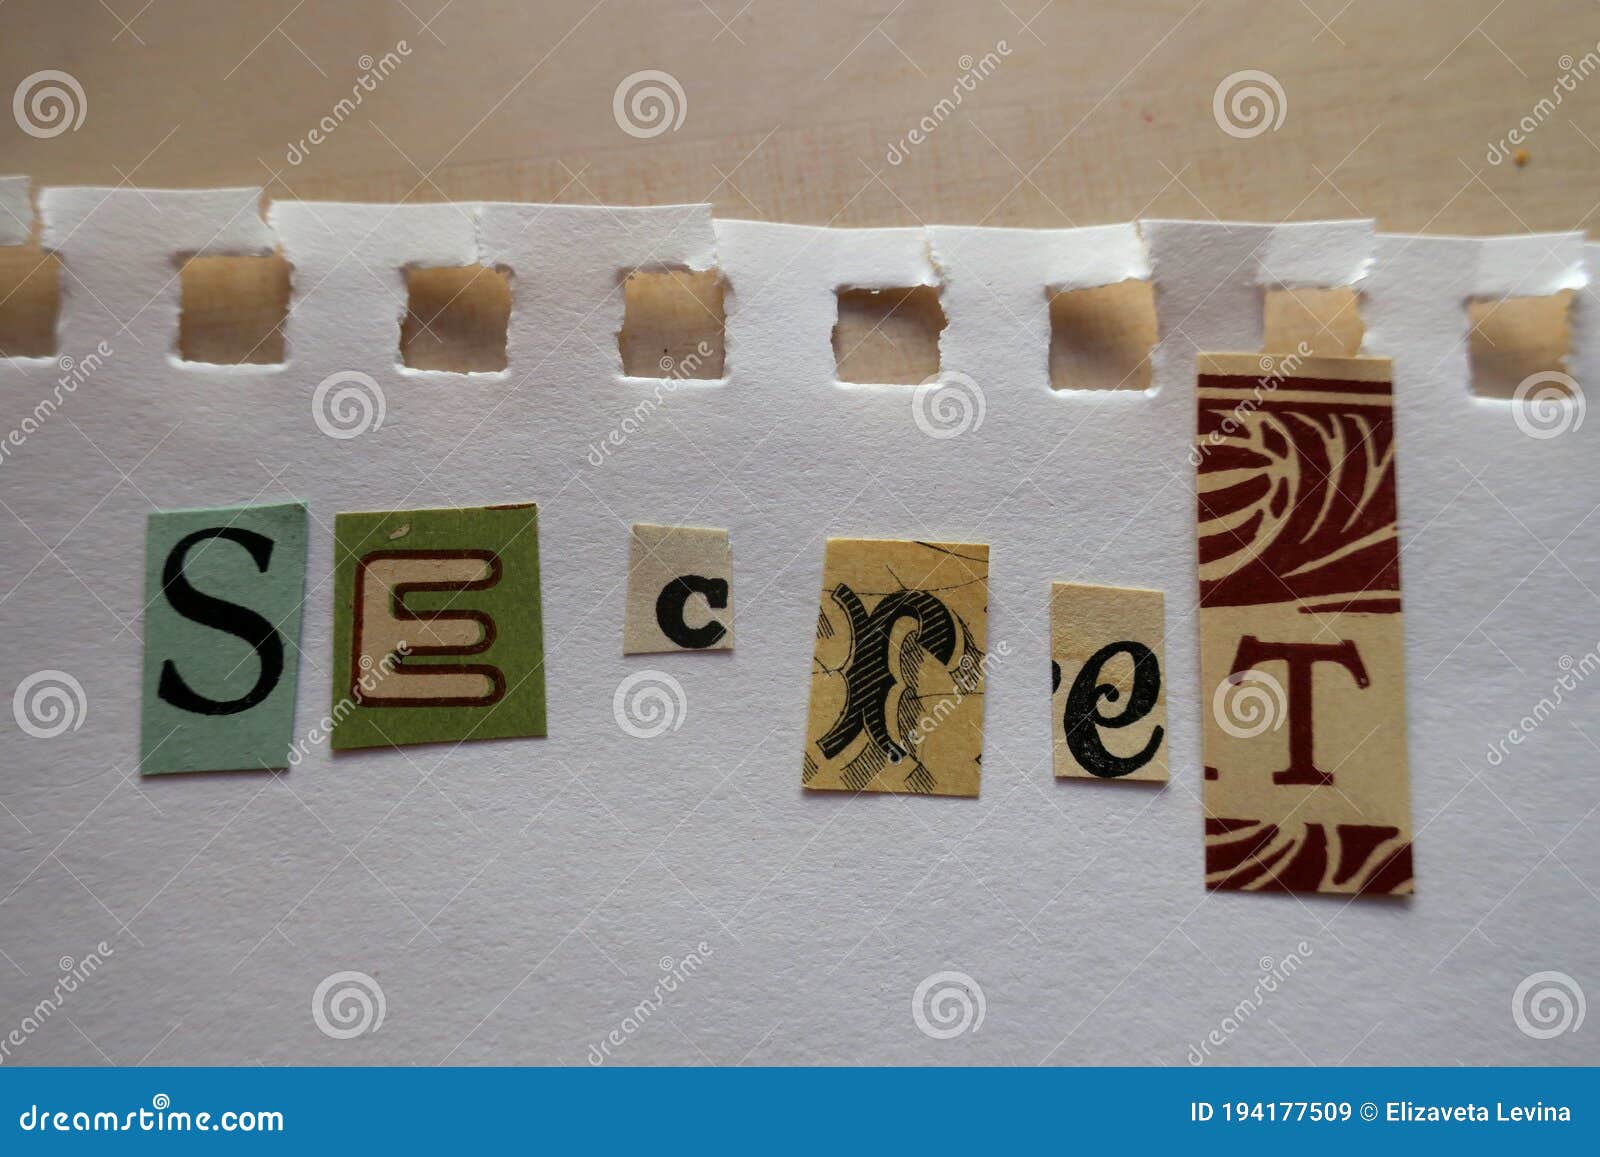 ransom note style collage saying secret on a sheet of white paper torn out of a notebook